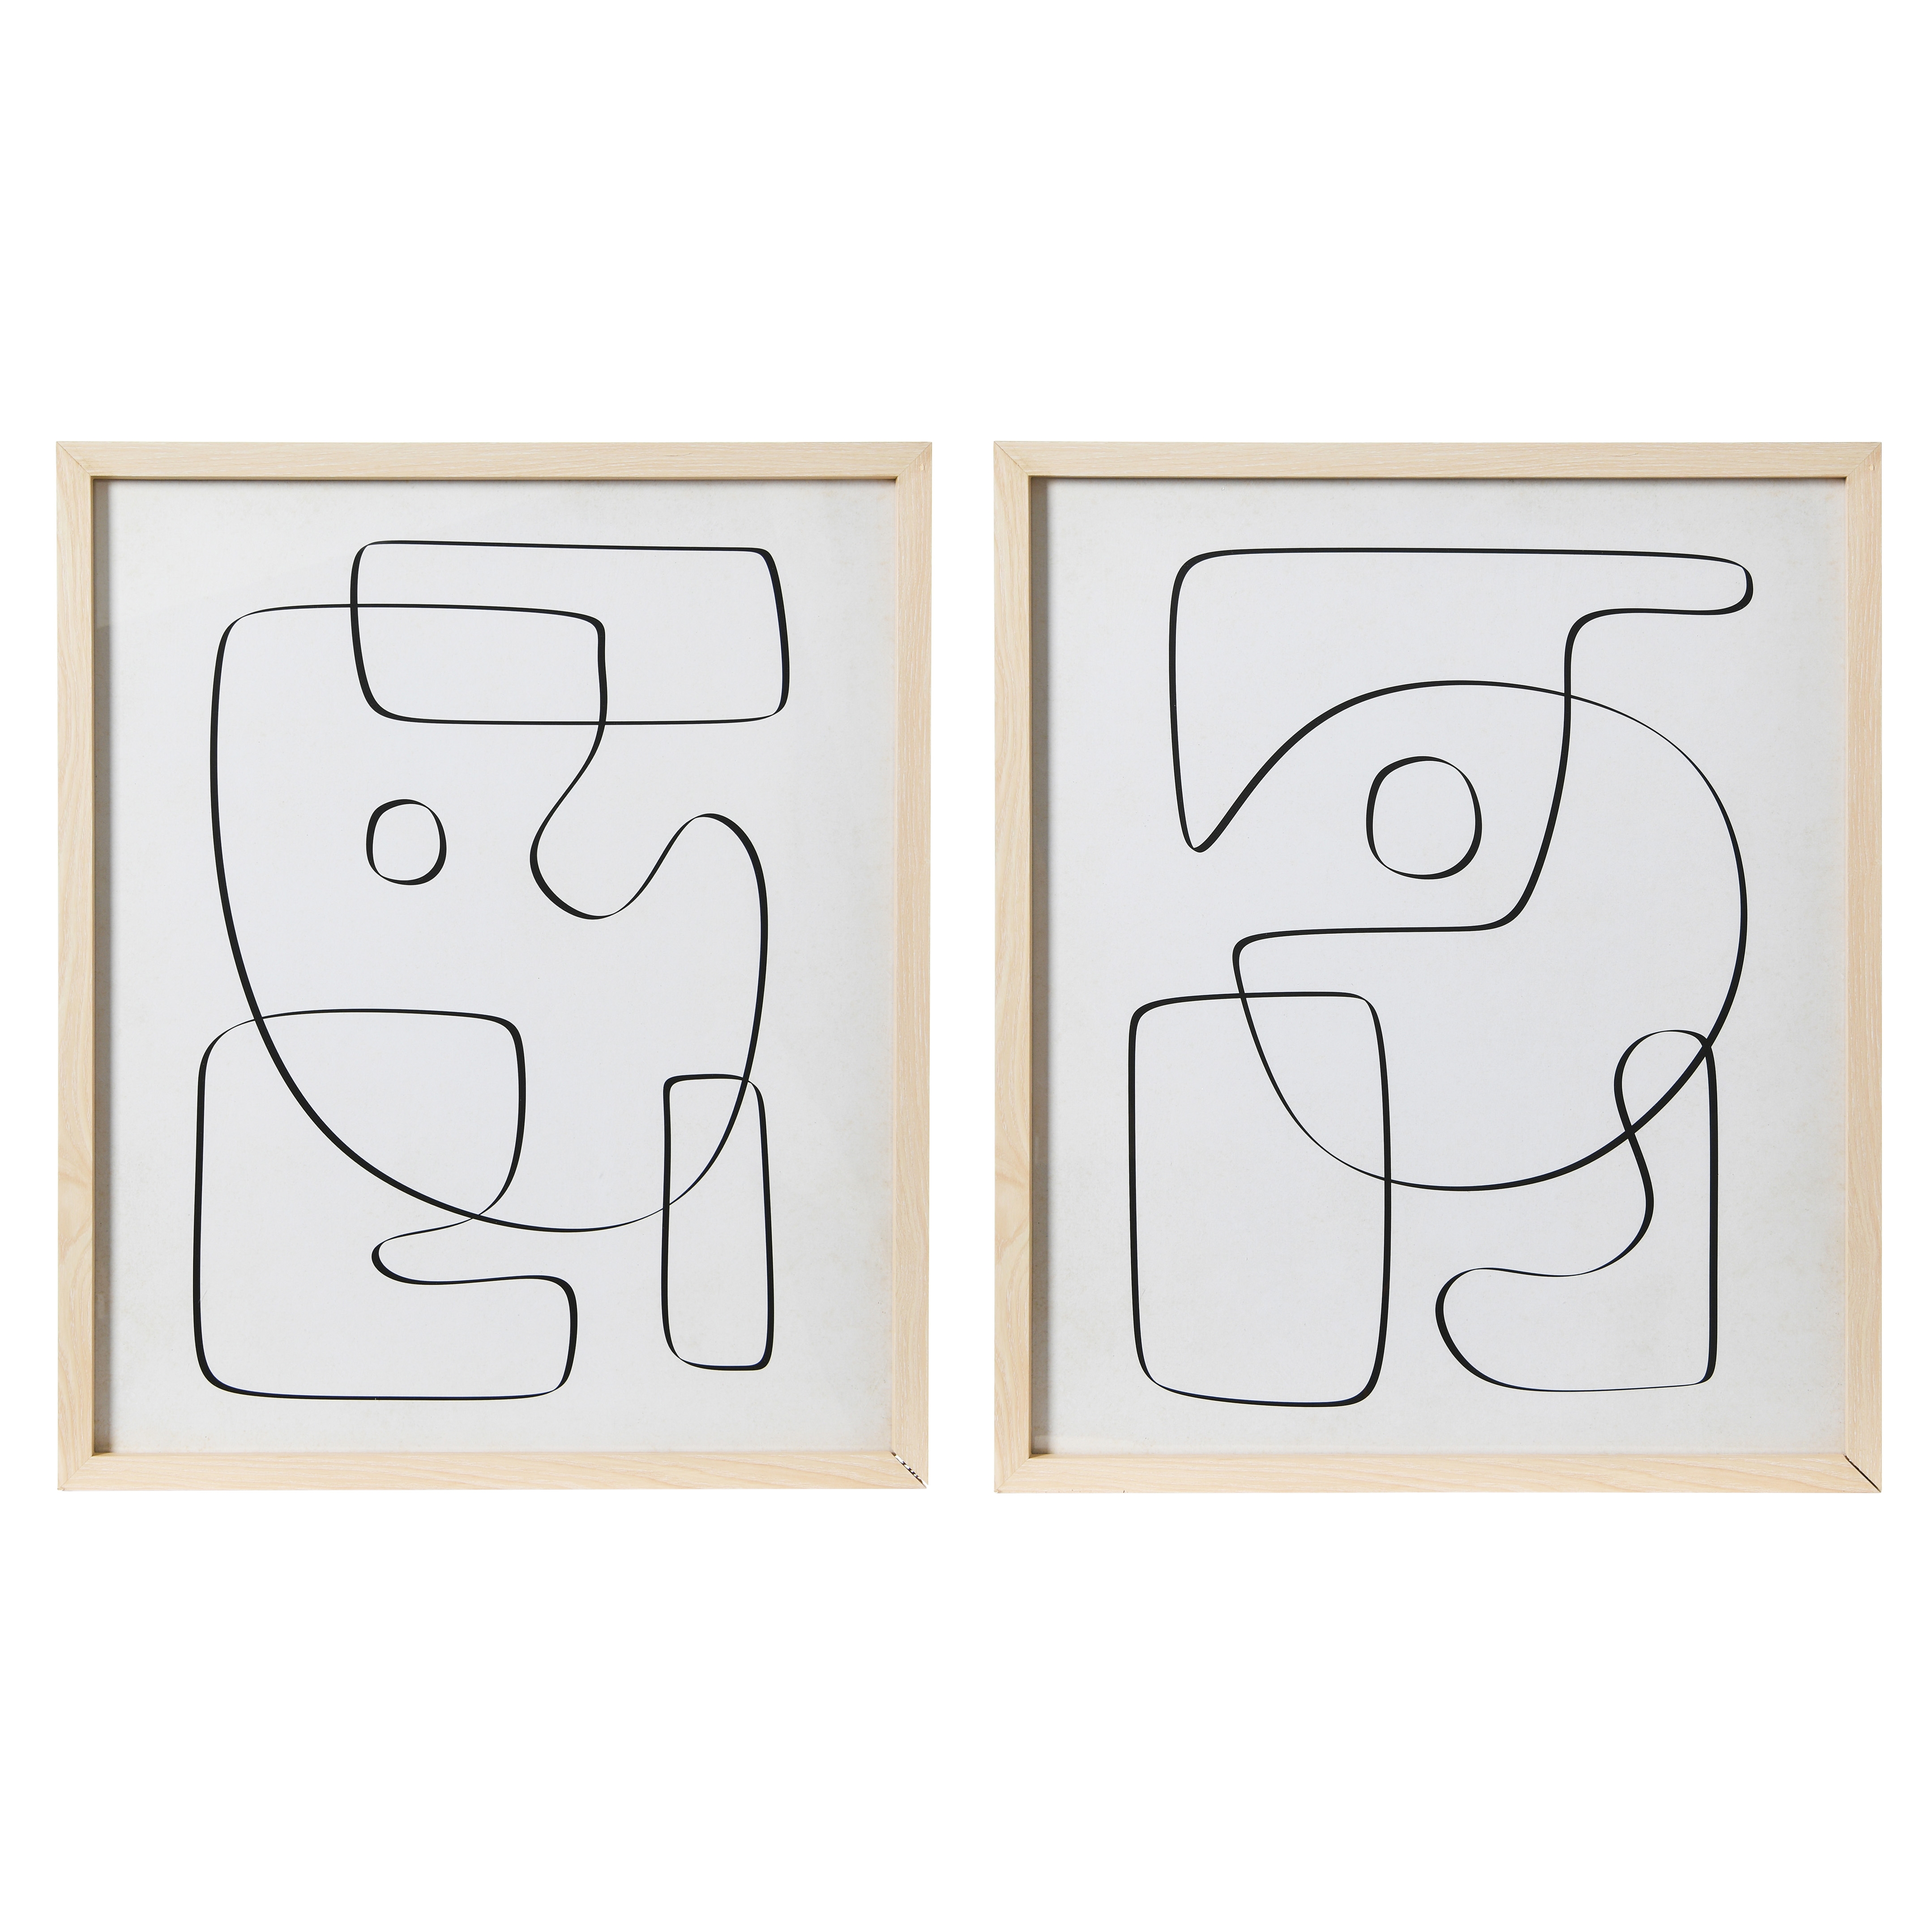 Abstract Line Drawings with Solid Wood Frame and Glass Cover, Set of 2 - Image 0